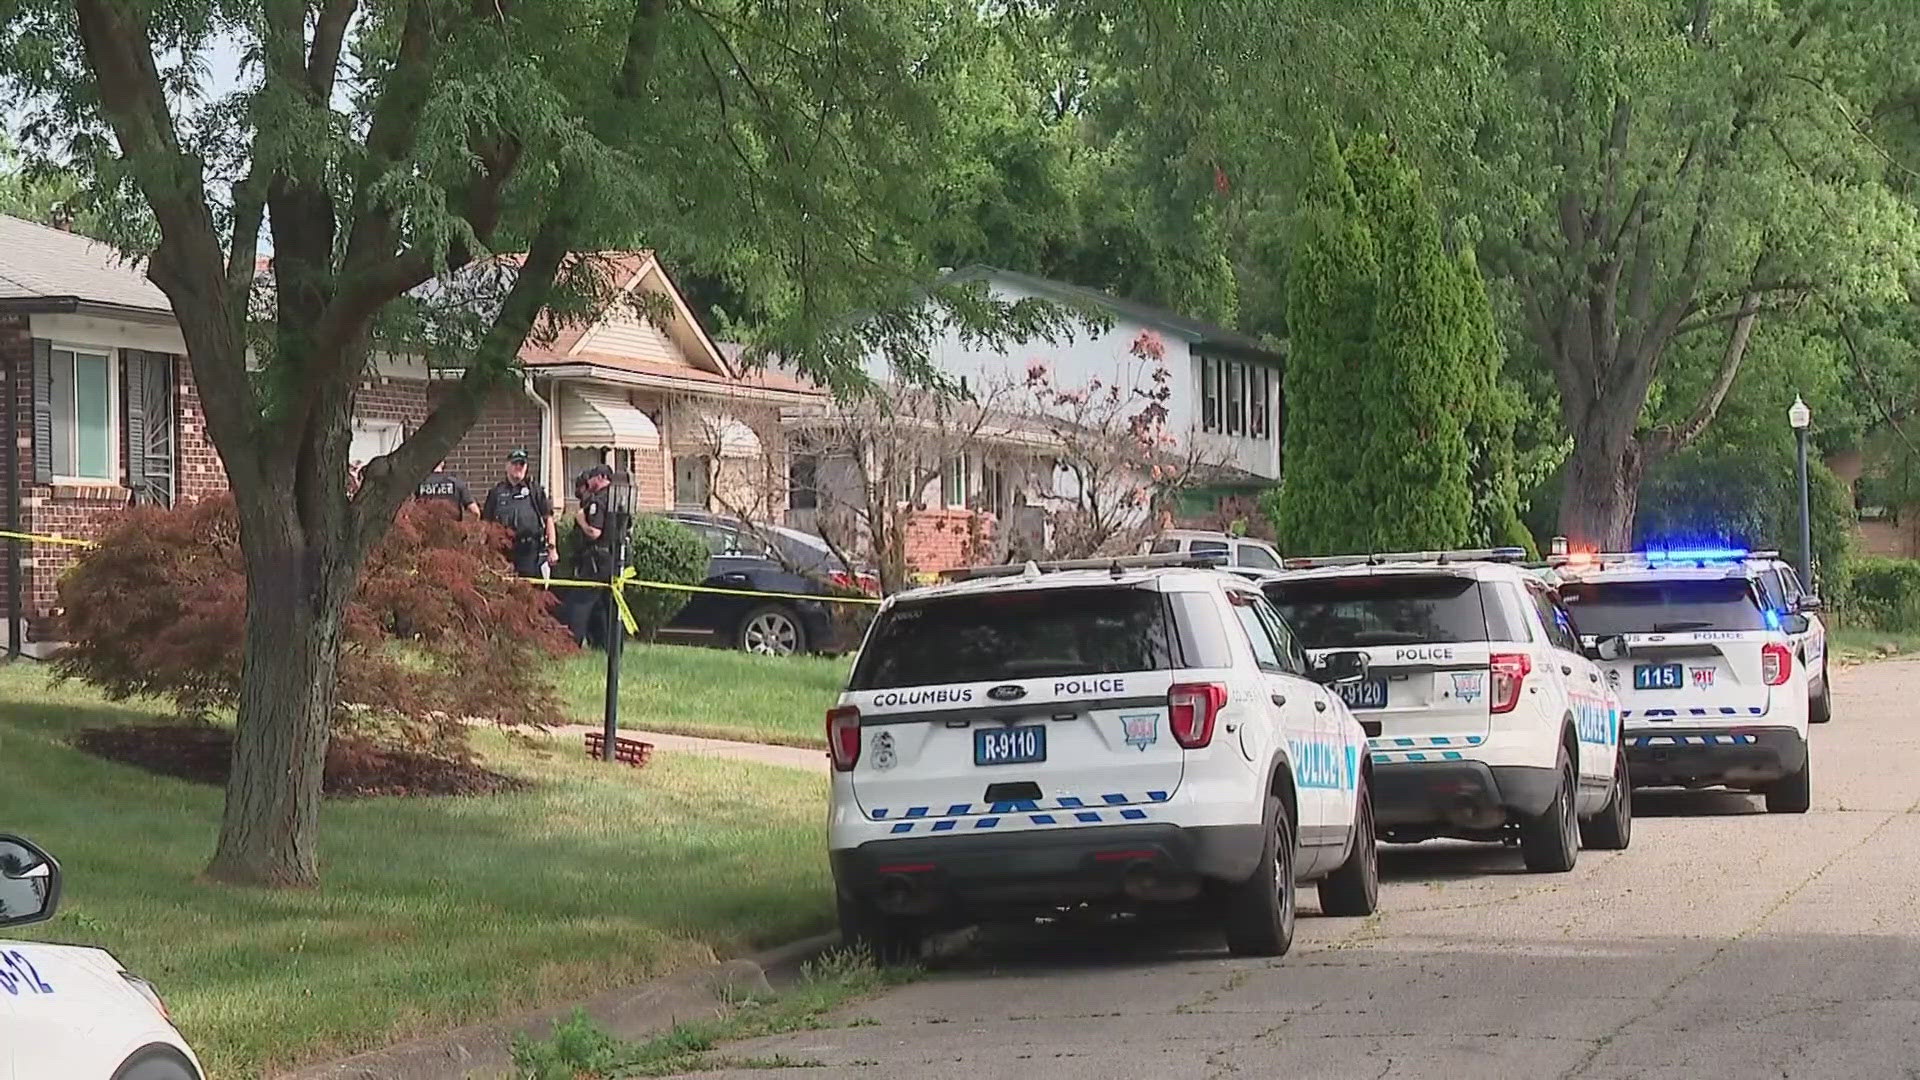 A dispatcher with the city's public safety department told 10TV that someone was doing a wellness check at the home when they found the bodies inside.